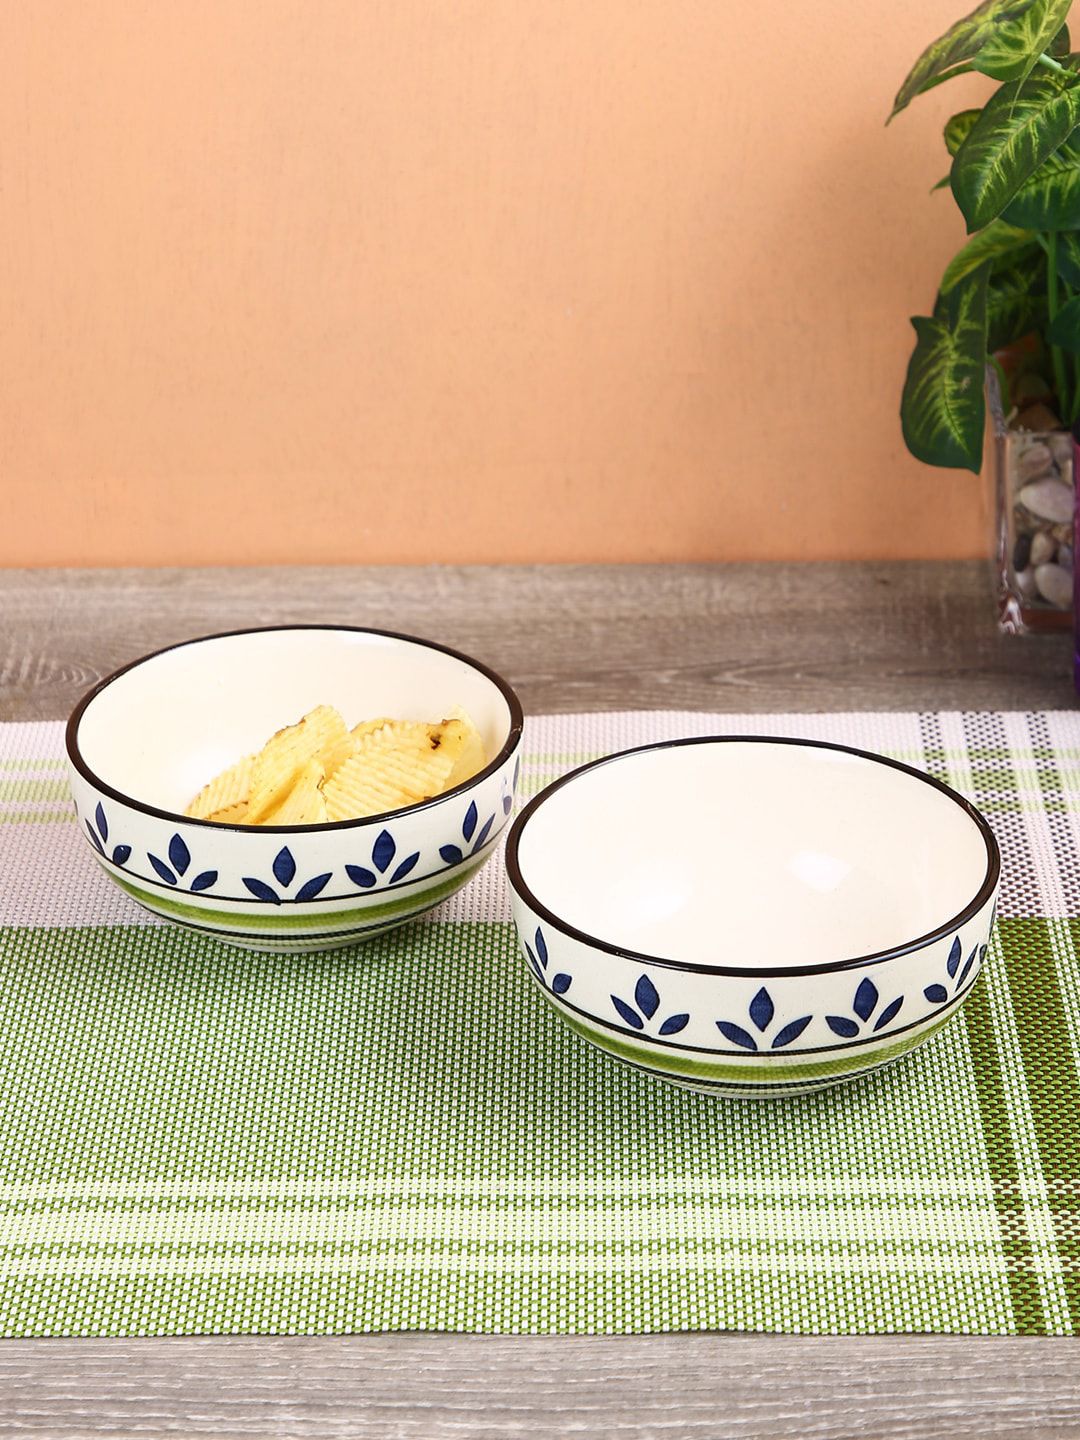 Aapno Rajasthan Set Of 2 White & Blue Textured Ceramic Snack Bowls Price in India